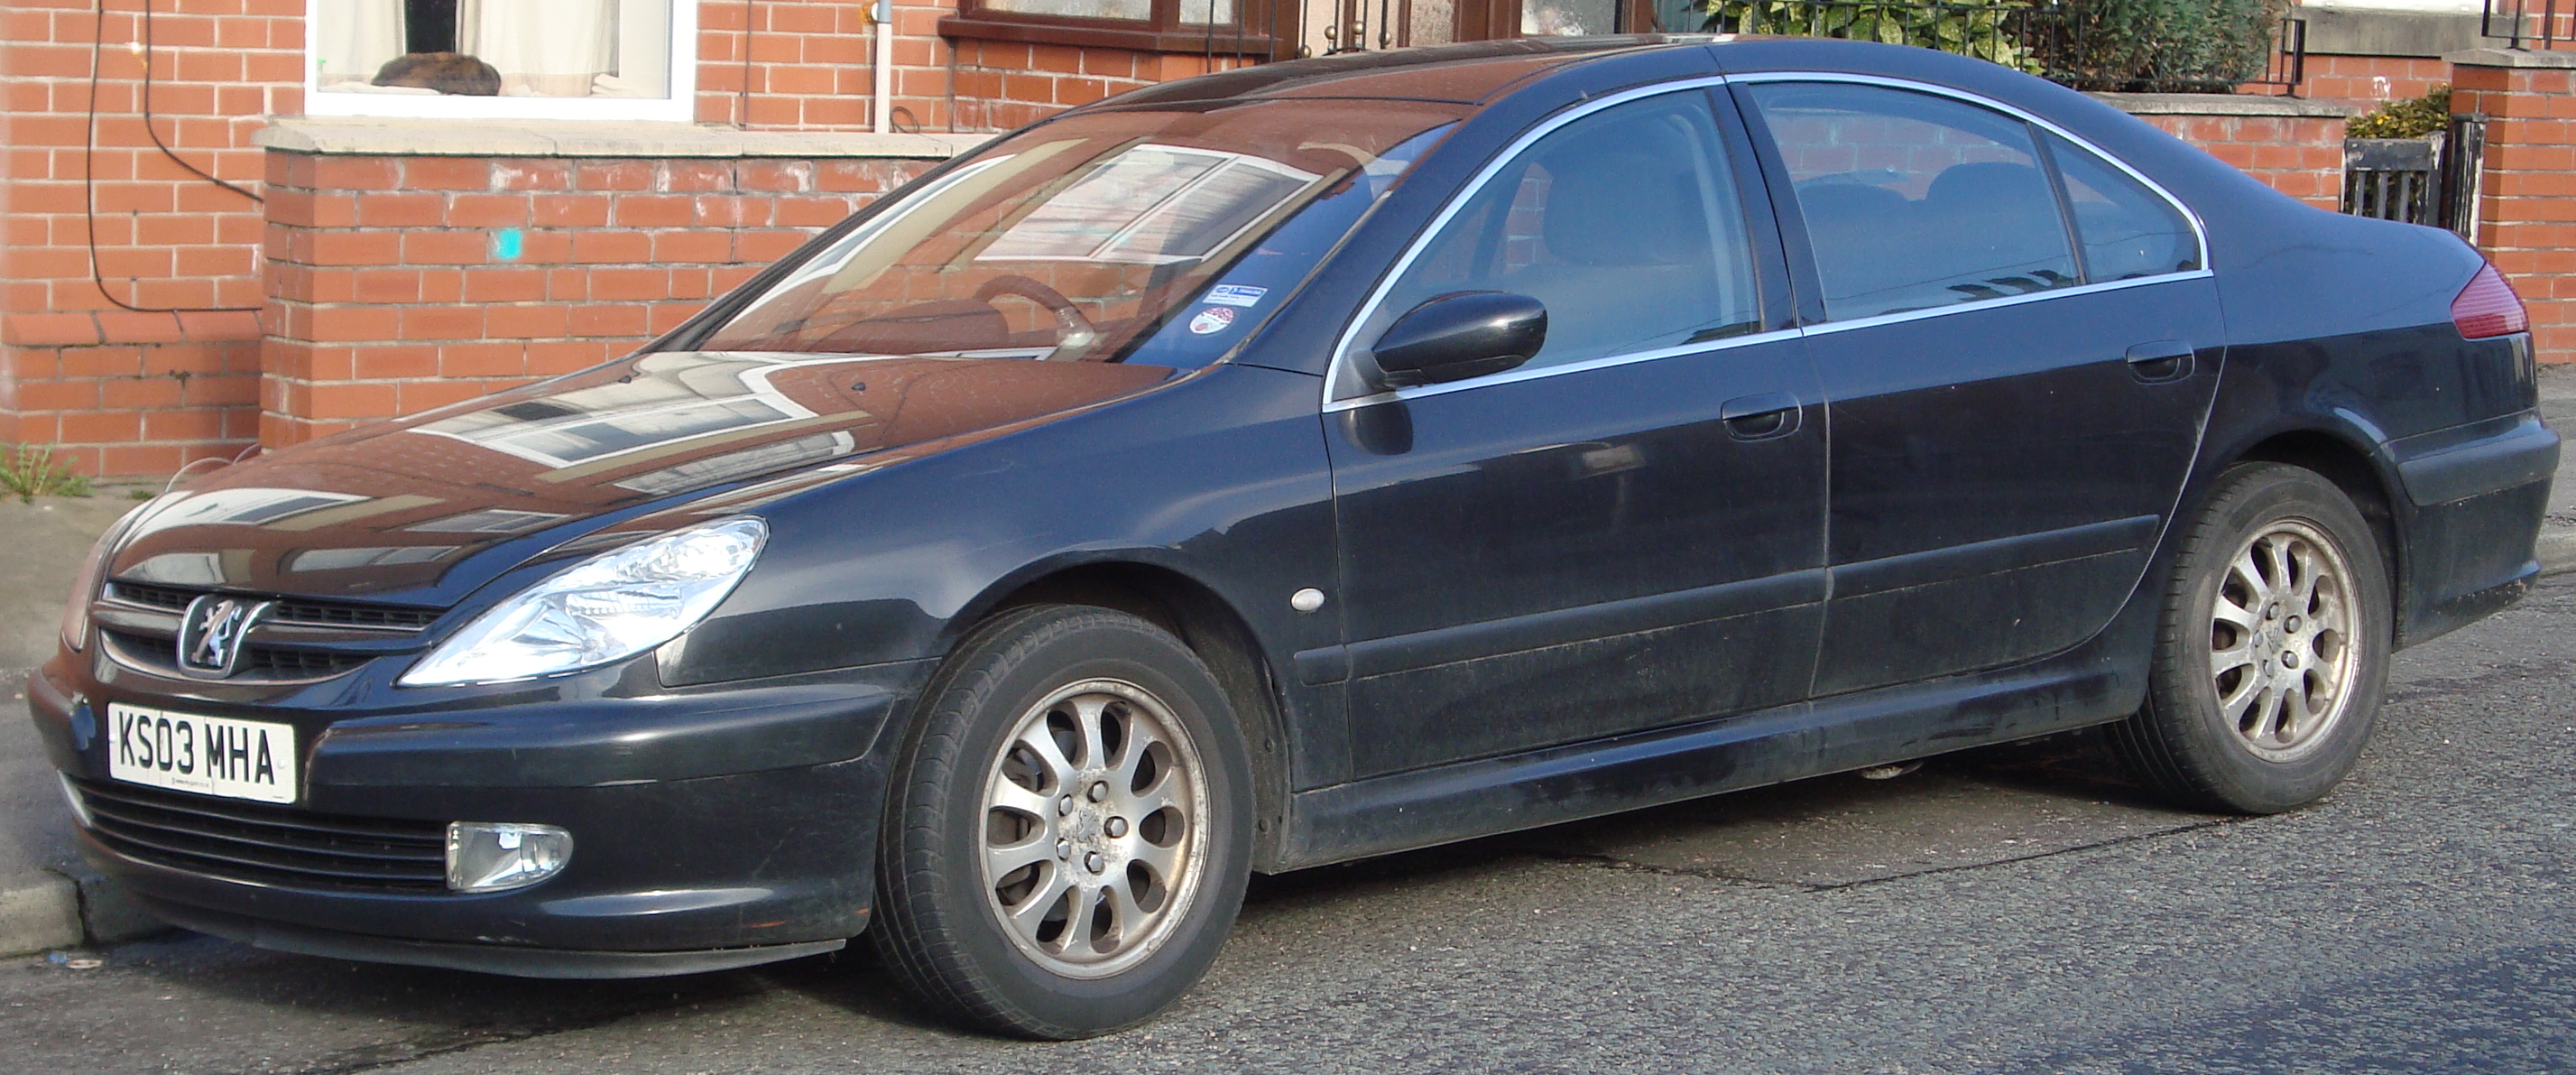 Photo of a Peugeot 607 similar to the one found at Nortre Dame. 